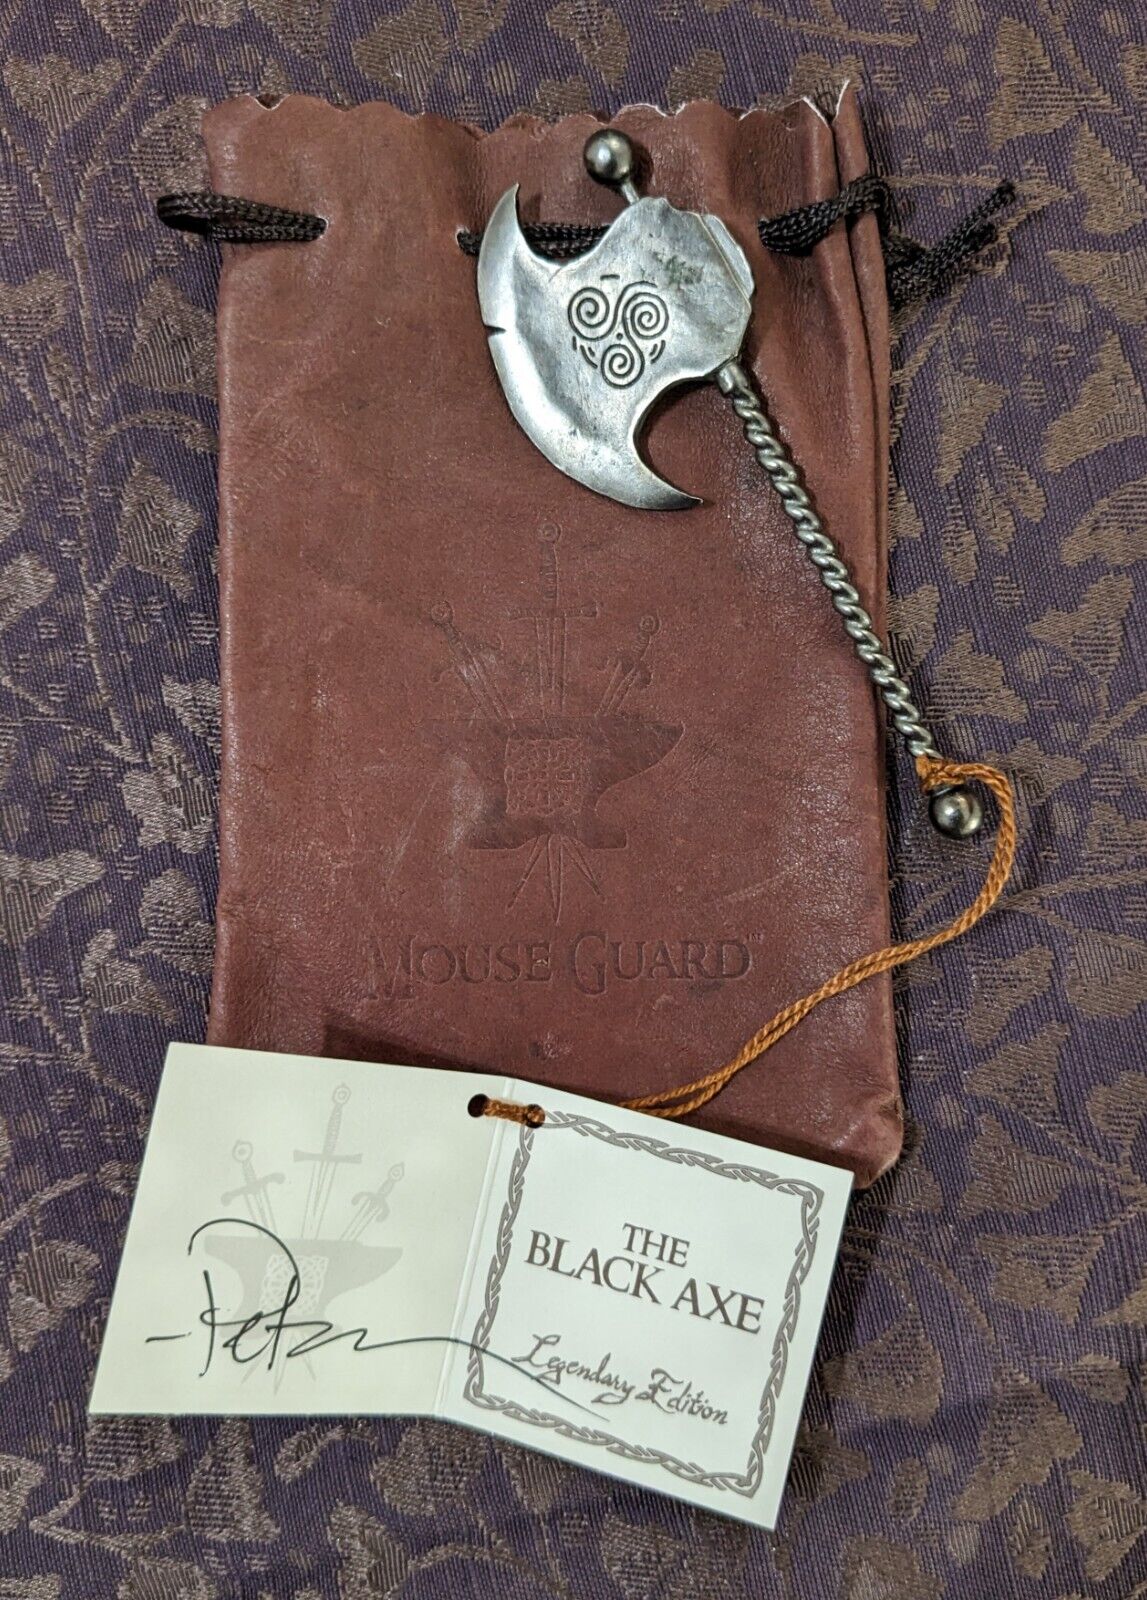 Mouse Guard Black Axe Replica Legendary Edition Signed by David Petersen